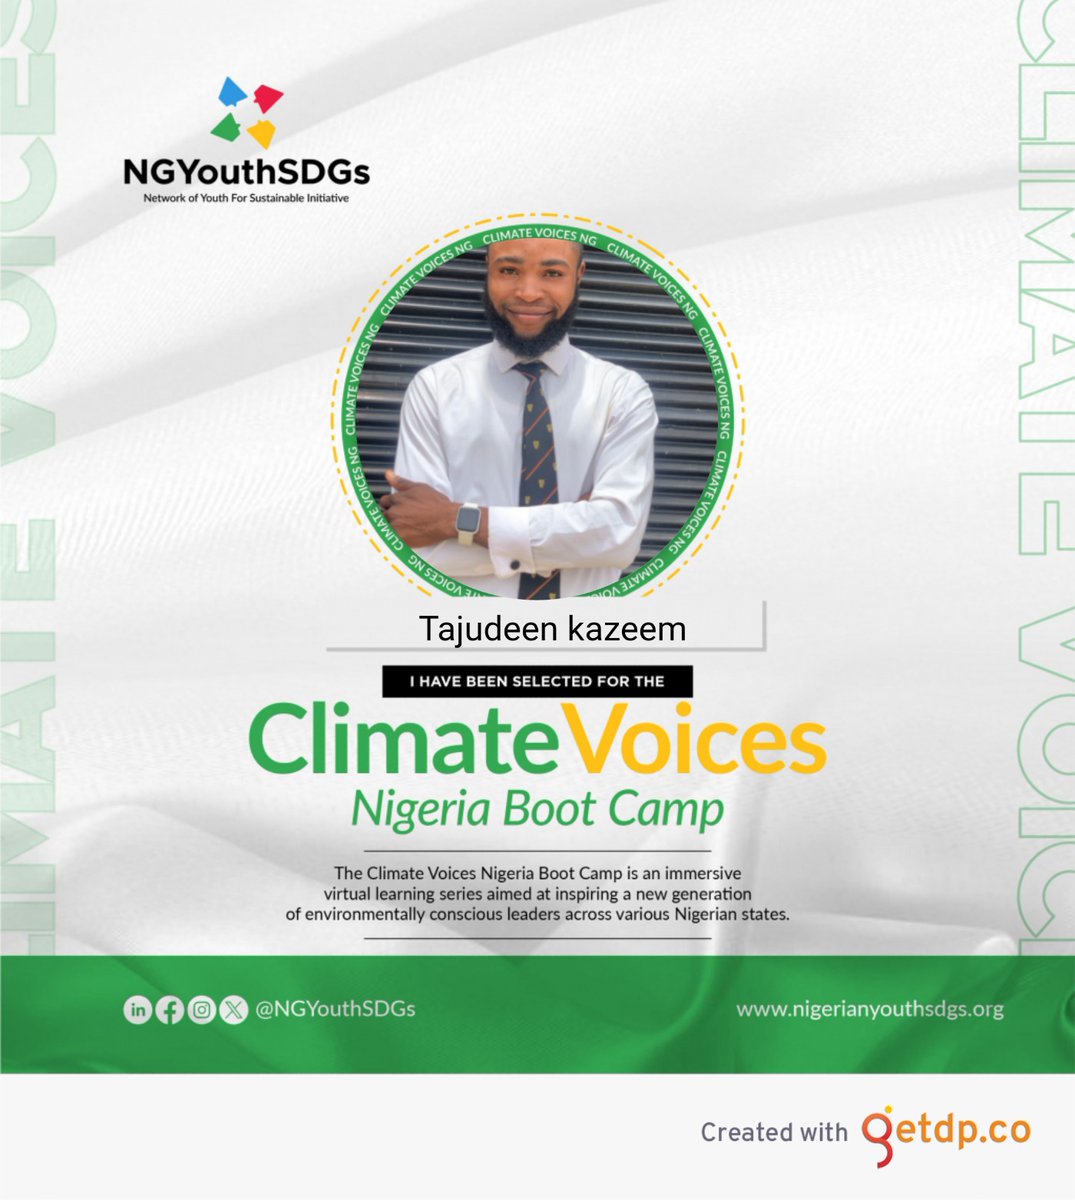 Excited 🥳
I will be be partaking in the Nigeria Climate Voices boot camp, I would be glad to network with Youths and other incredible people across the Nigeria discussing Climate action
#sdgs2030
#ClimateVoicesNG
@NGYouthSDGs